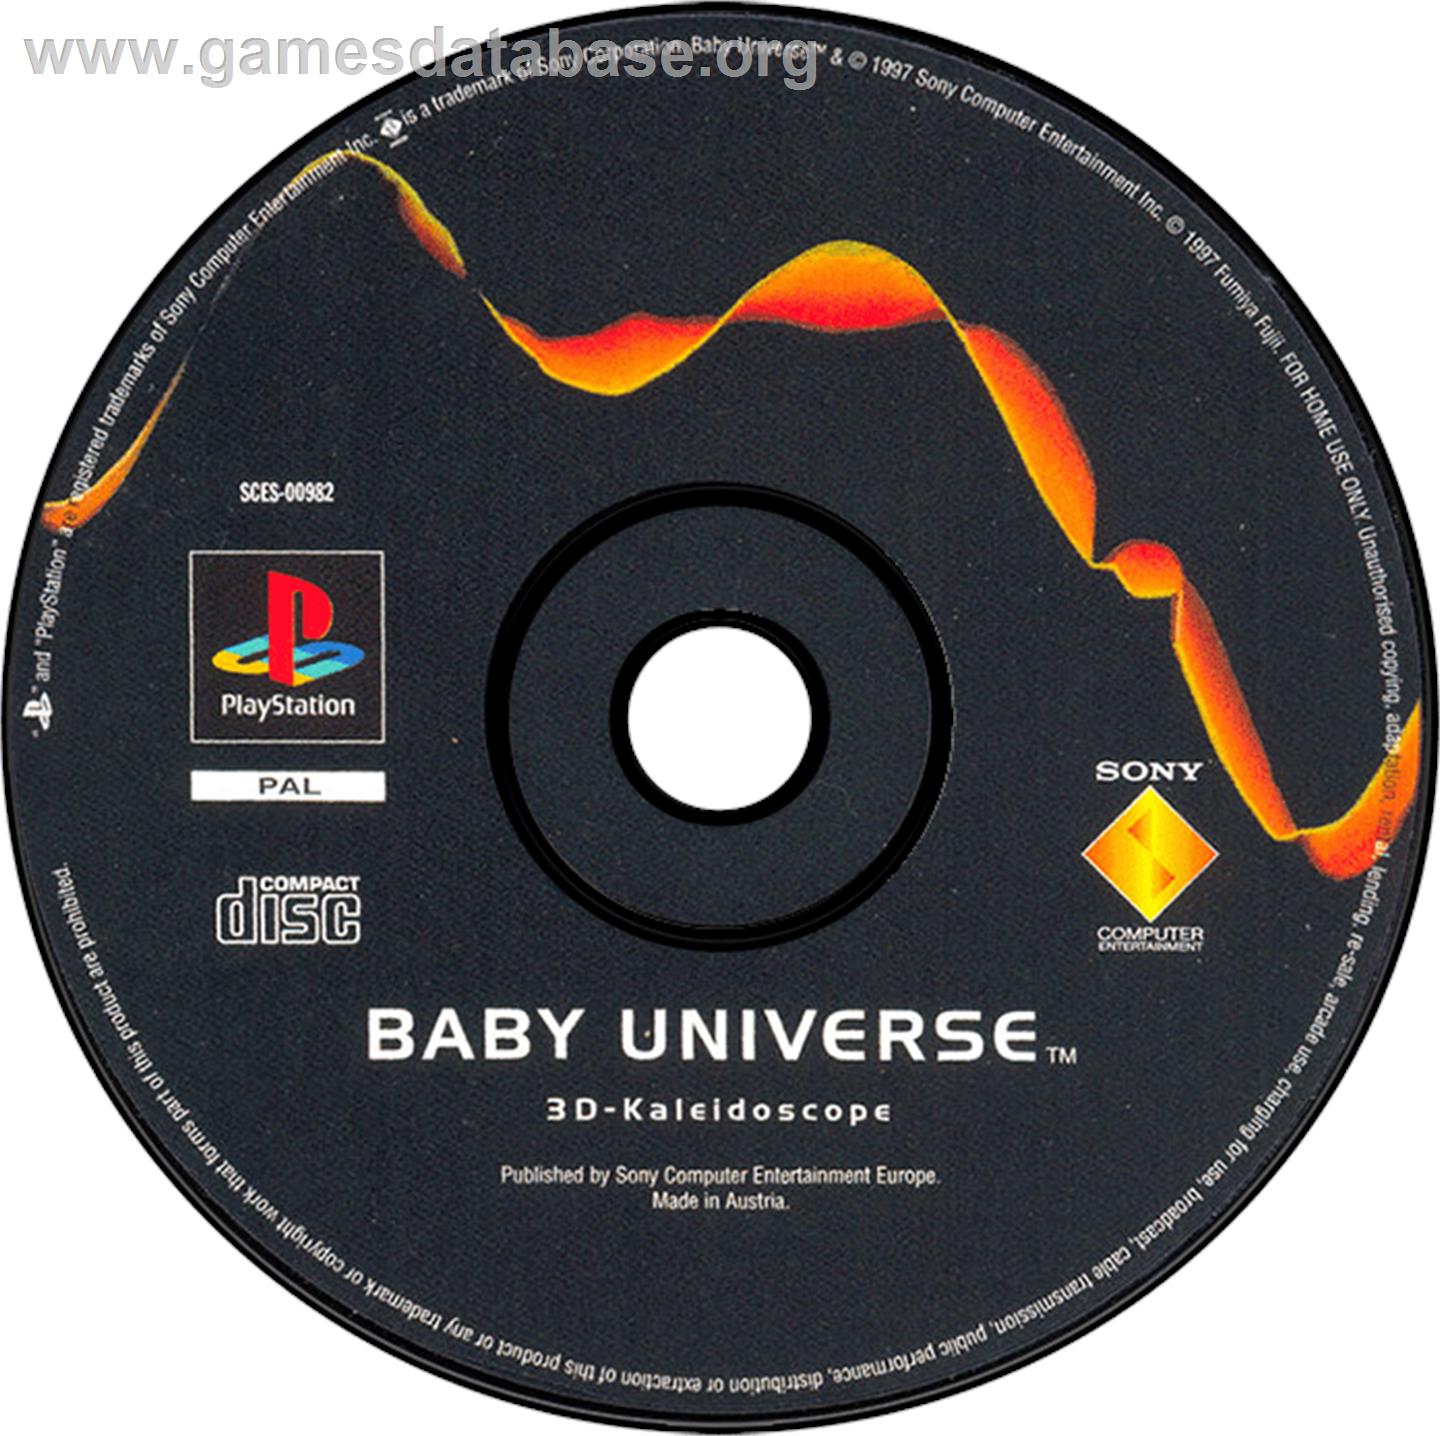 Baby Universe - Sony Playstation - Artwork - Disc